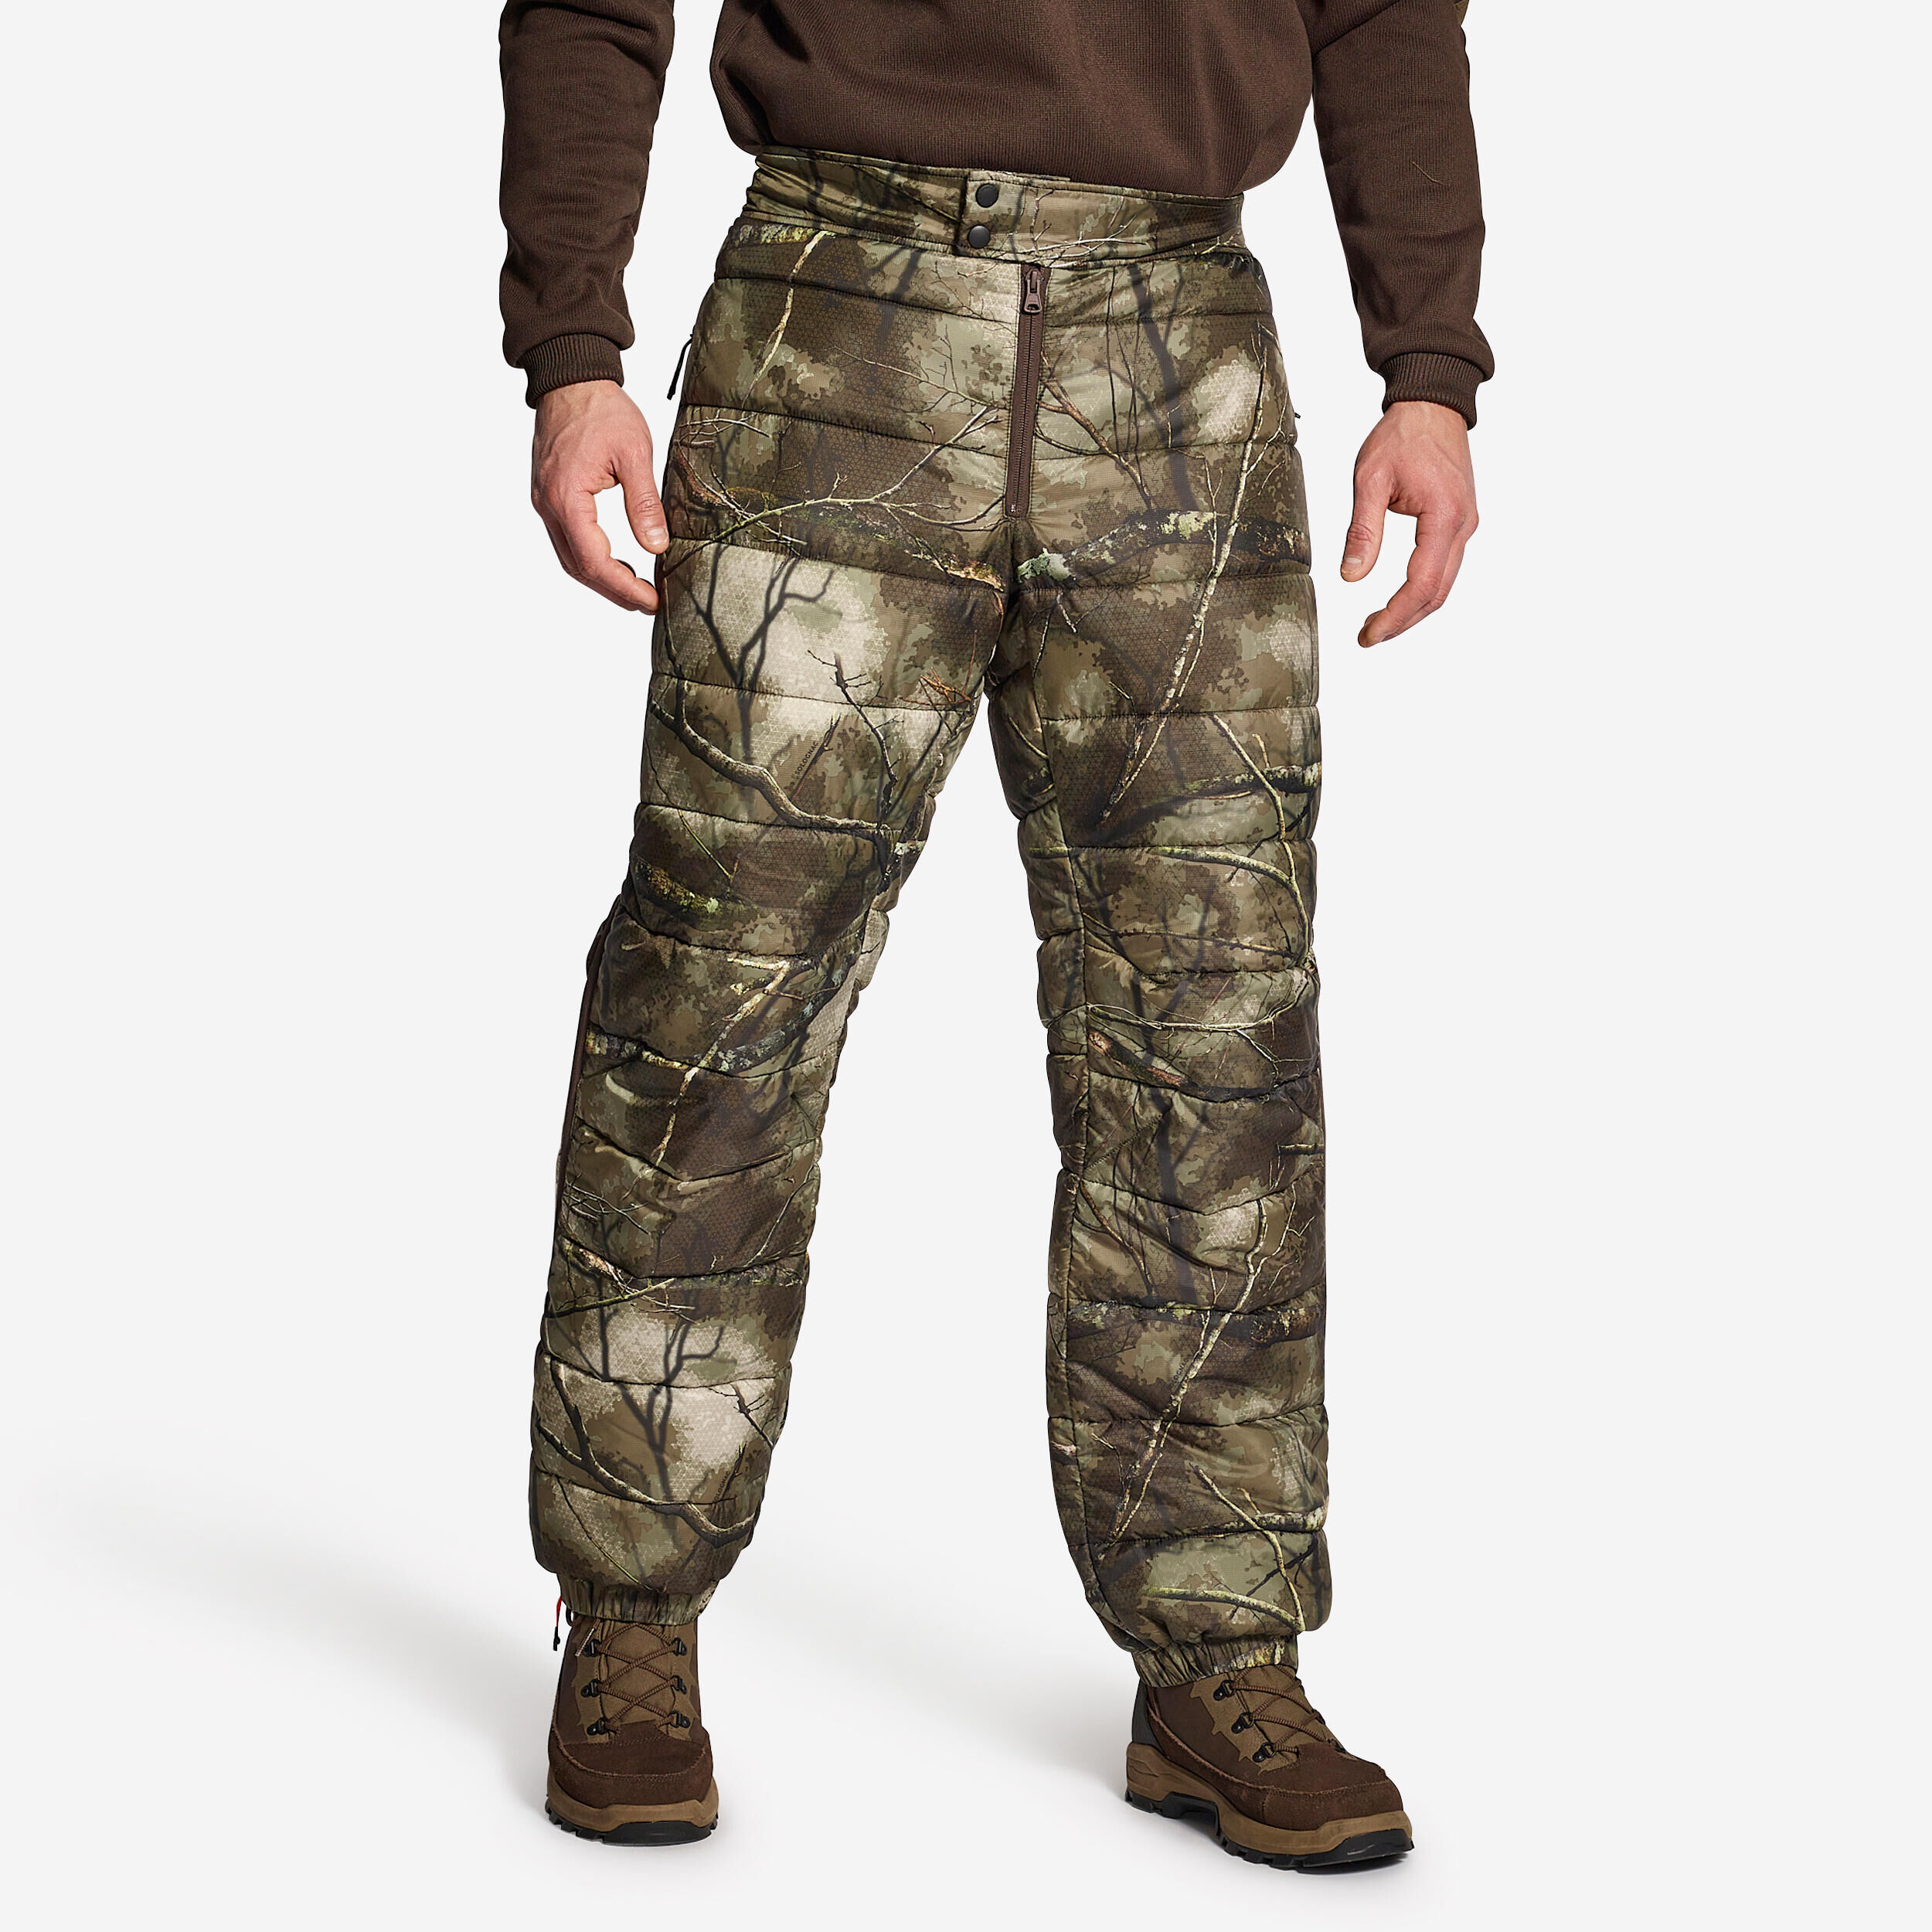 SOLOGNAC COMPRESSIBLE OVERTROUSERS WARM AND LIGHT TREEMETIC